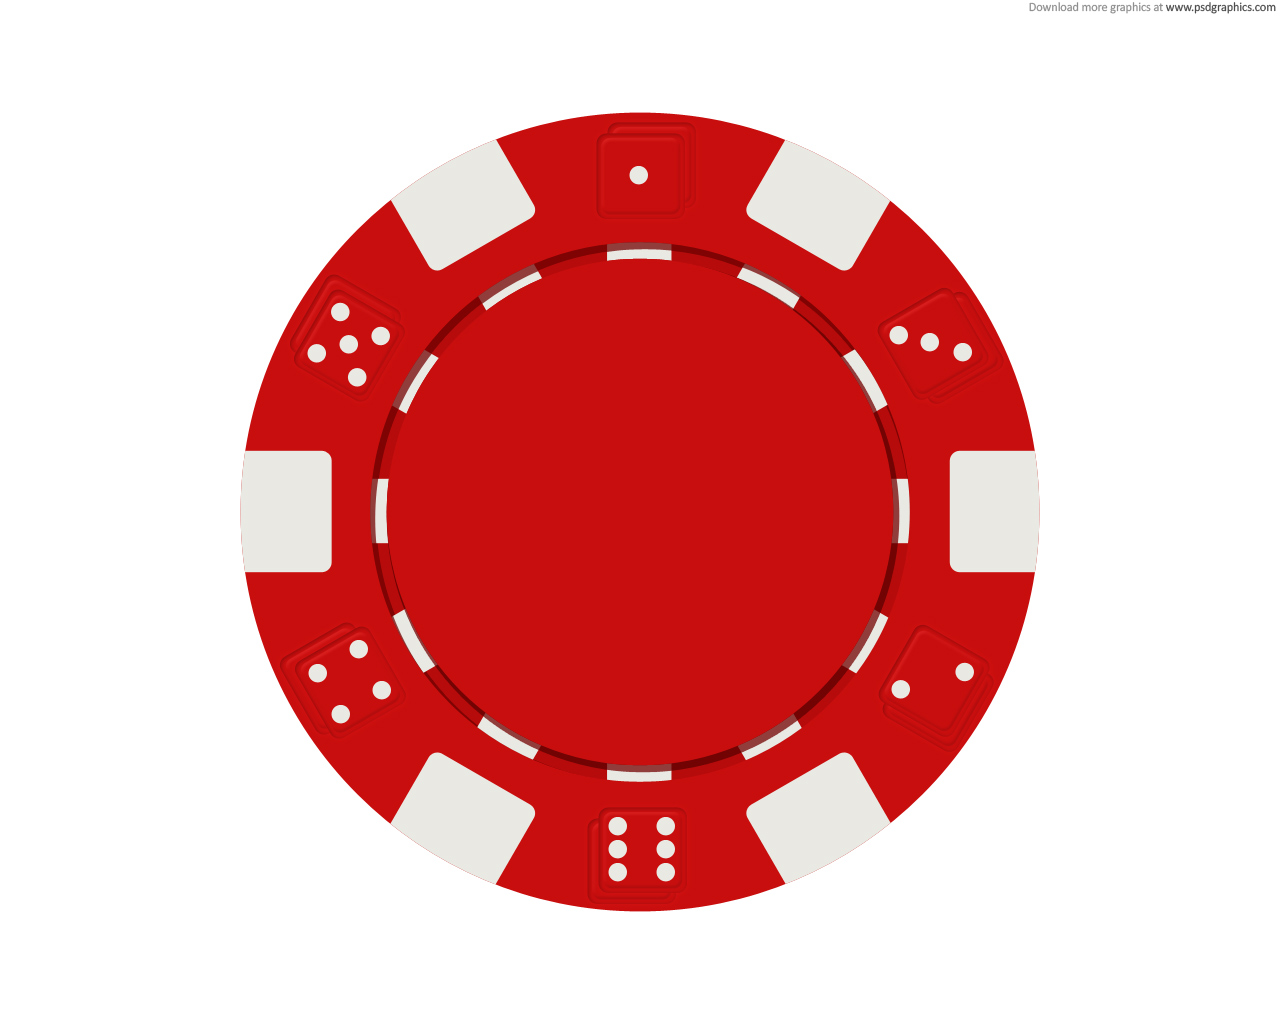 Red poker chip icon #43951.